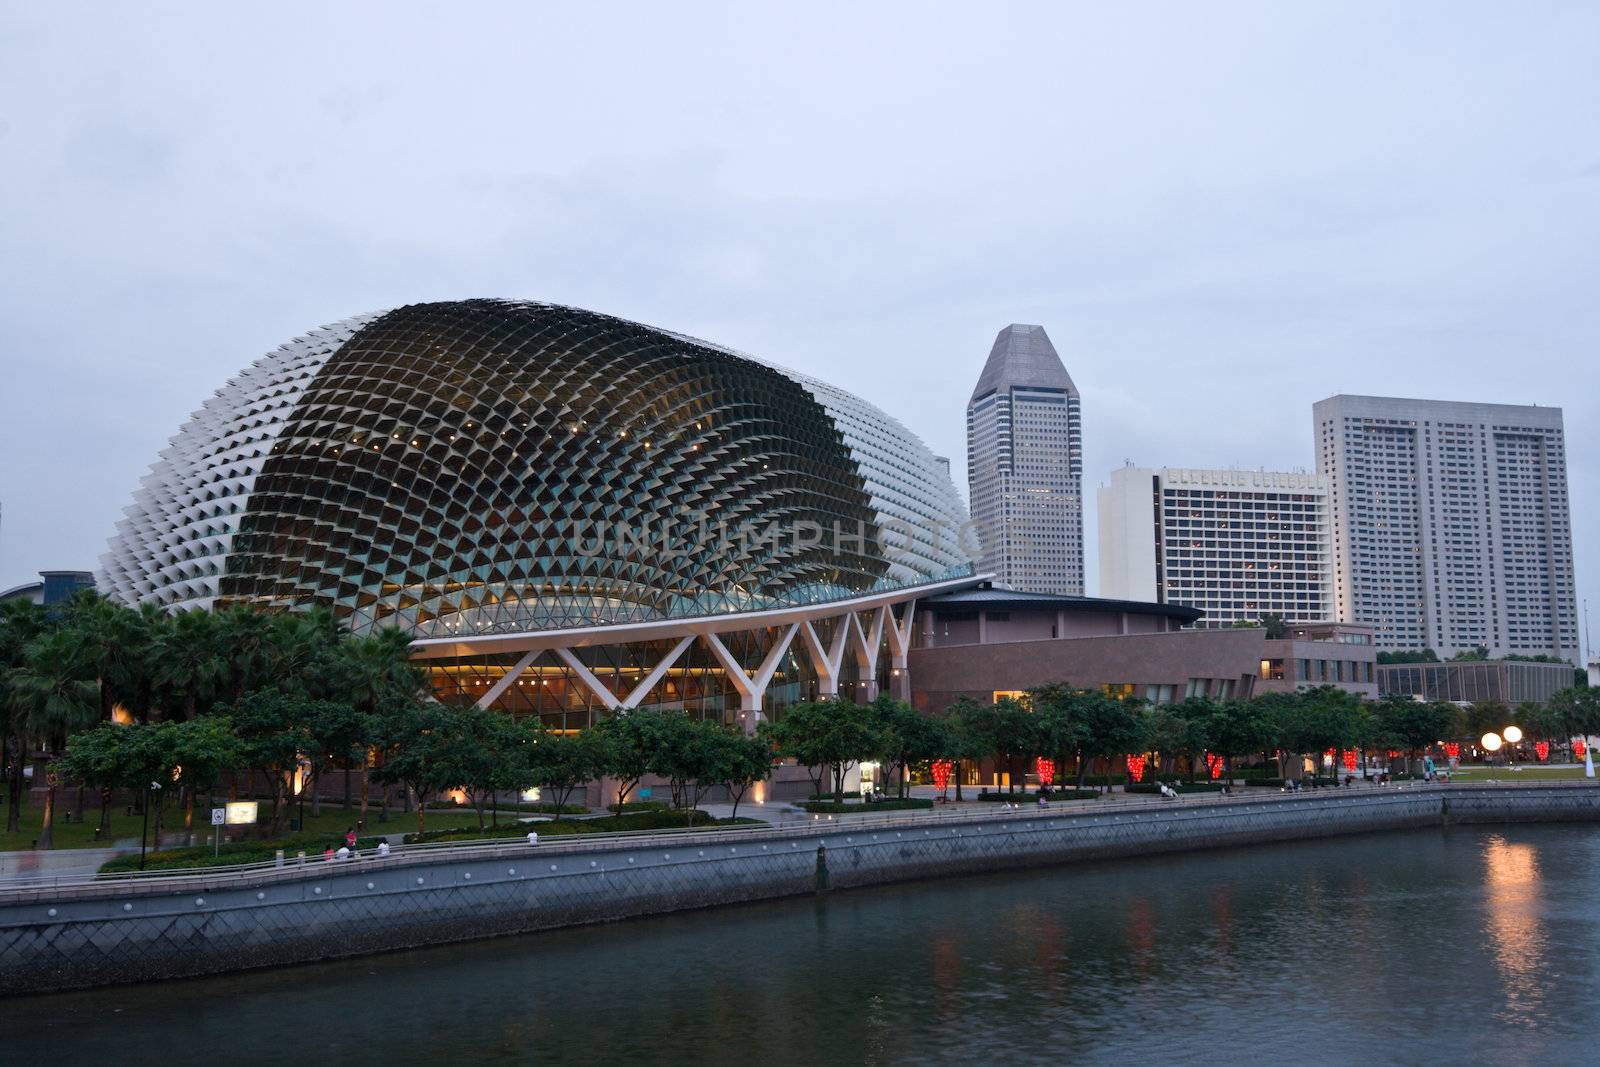 Esplanade (Singapore opera and concert hall at dusk by dimol